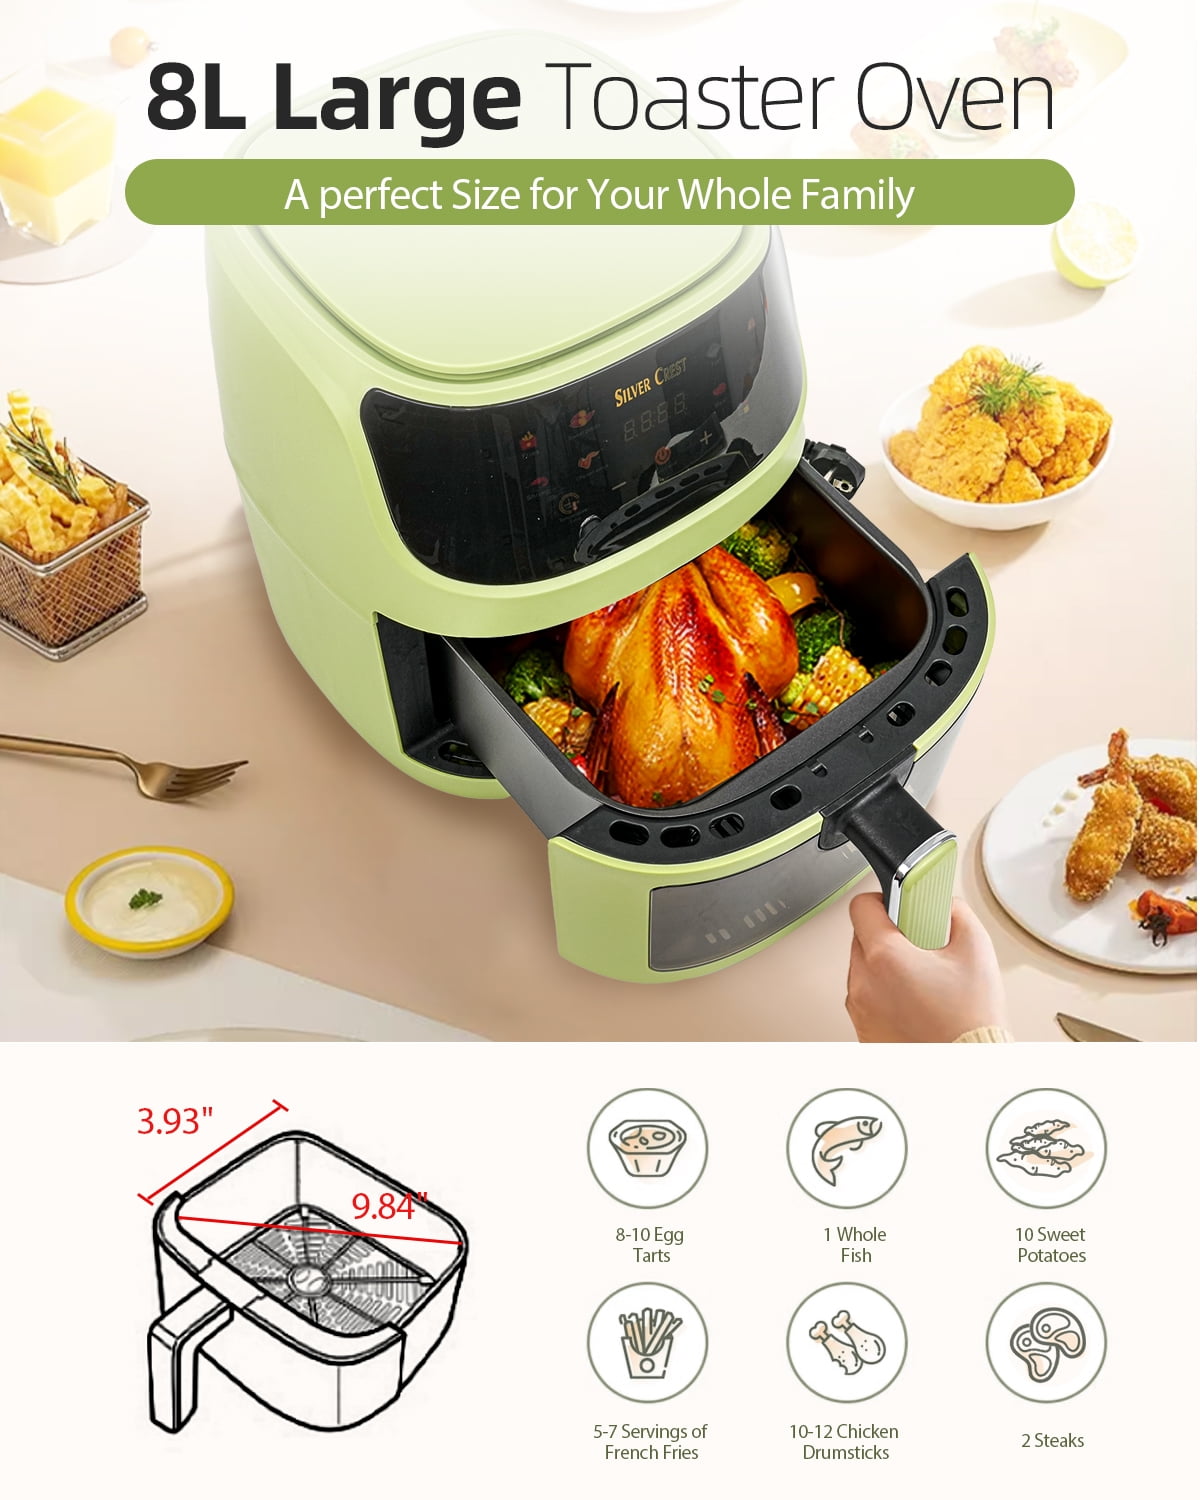  LIUXR Air Fryer, Air Fry, Oven Oilless Cooker, with